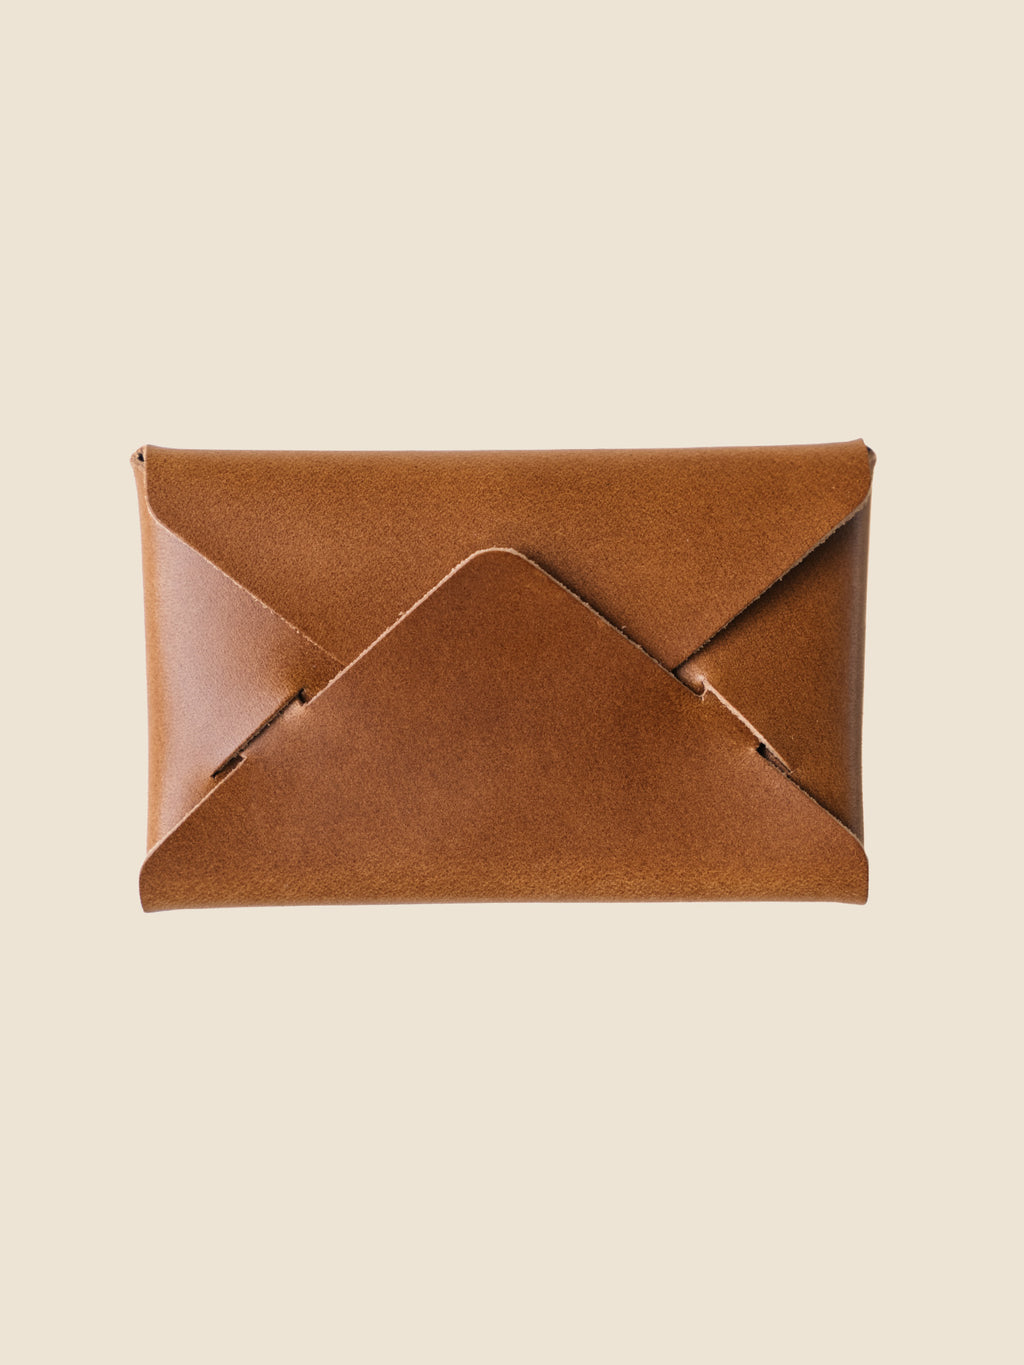 Natural Vegetable Tanned Leather Wallet Bifold Wallet -  Norway